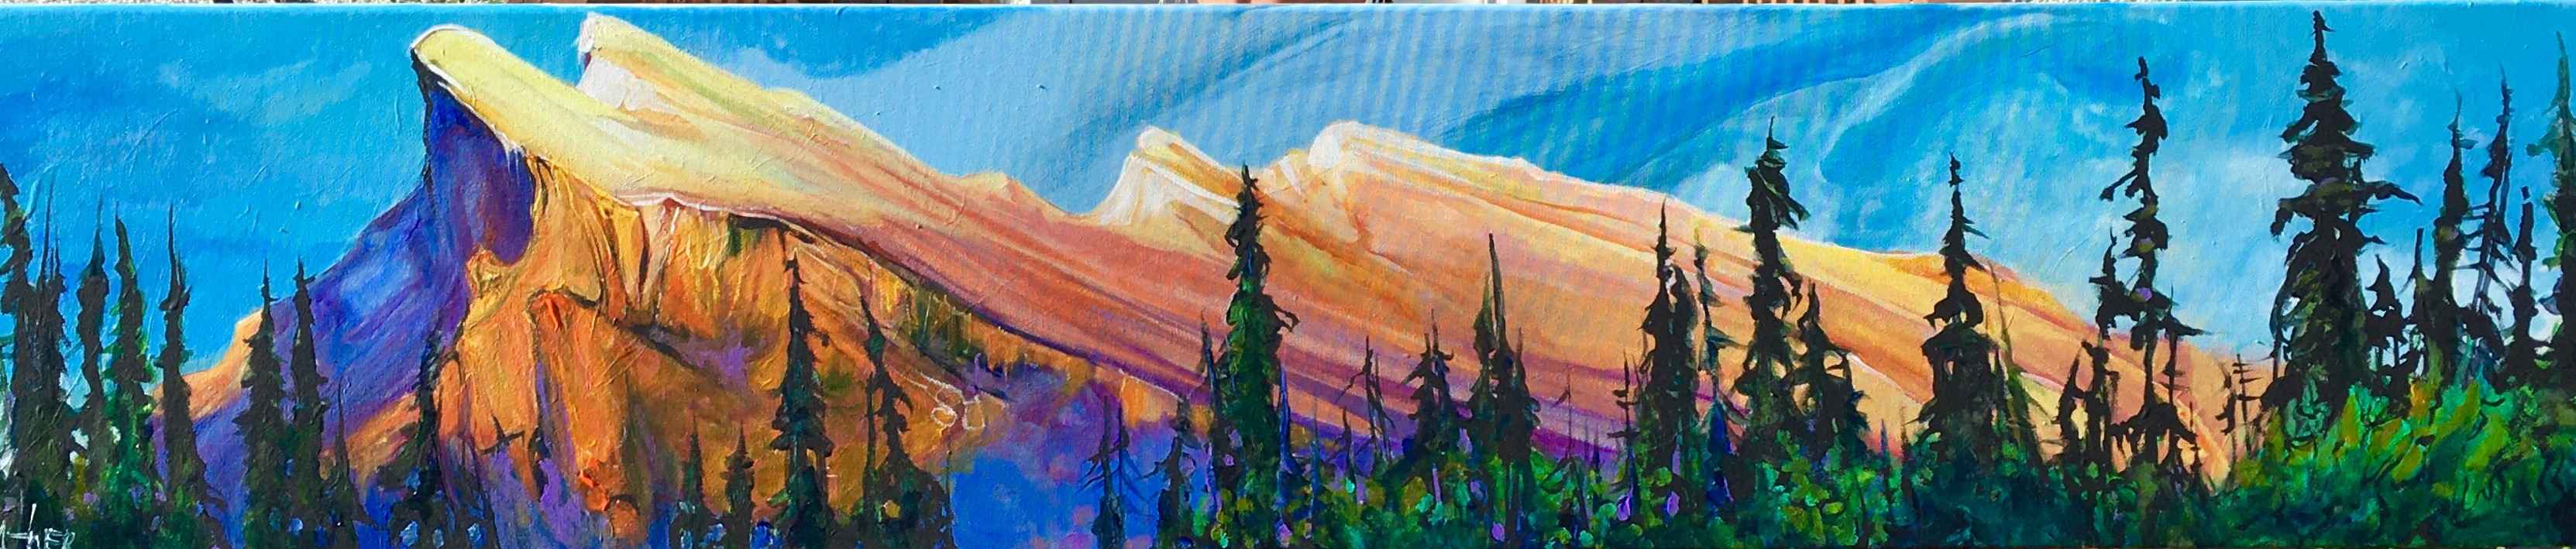 Mount Rundle - Living... by  Heather Pant - Masterpiece Online